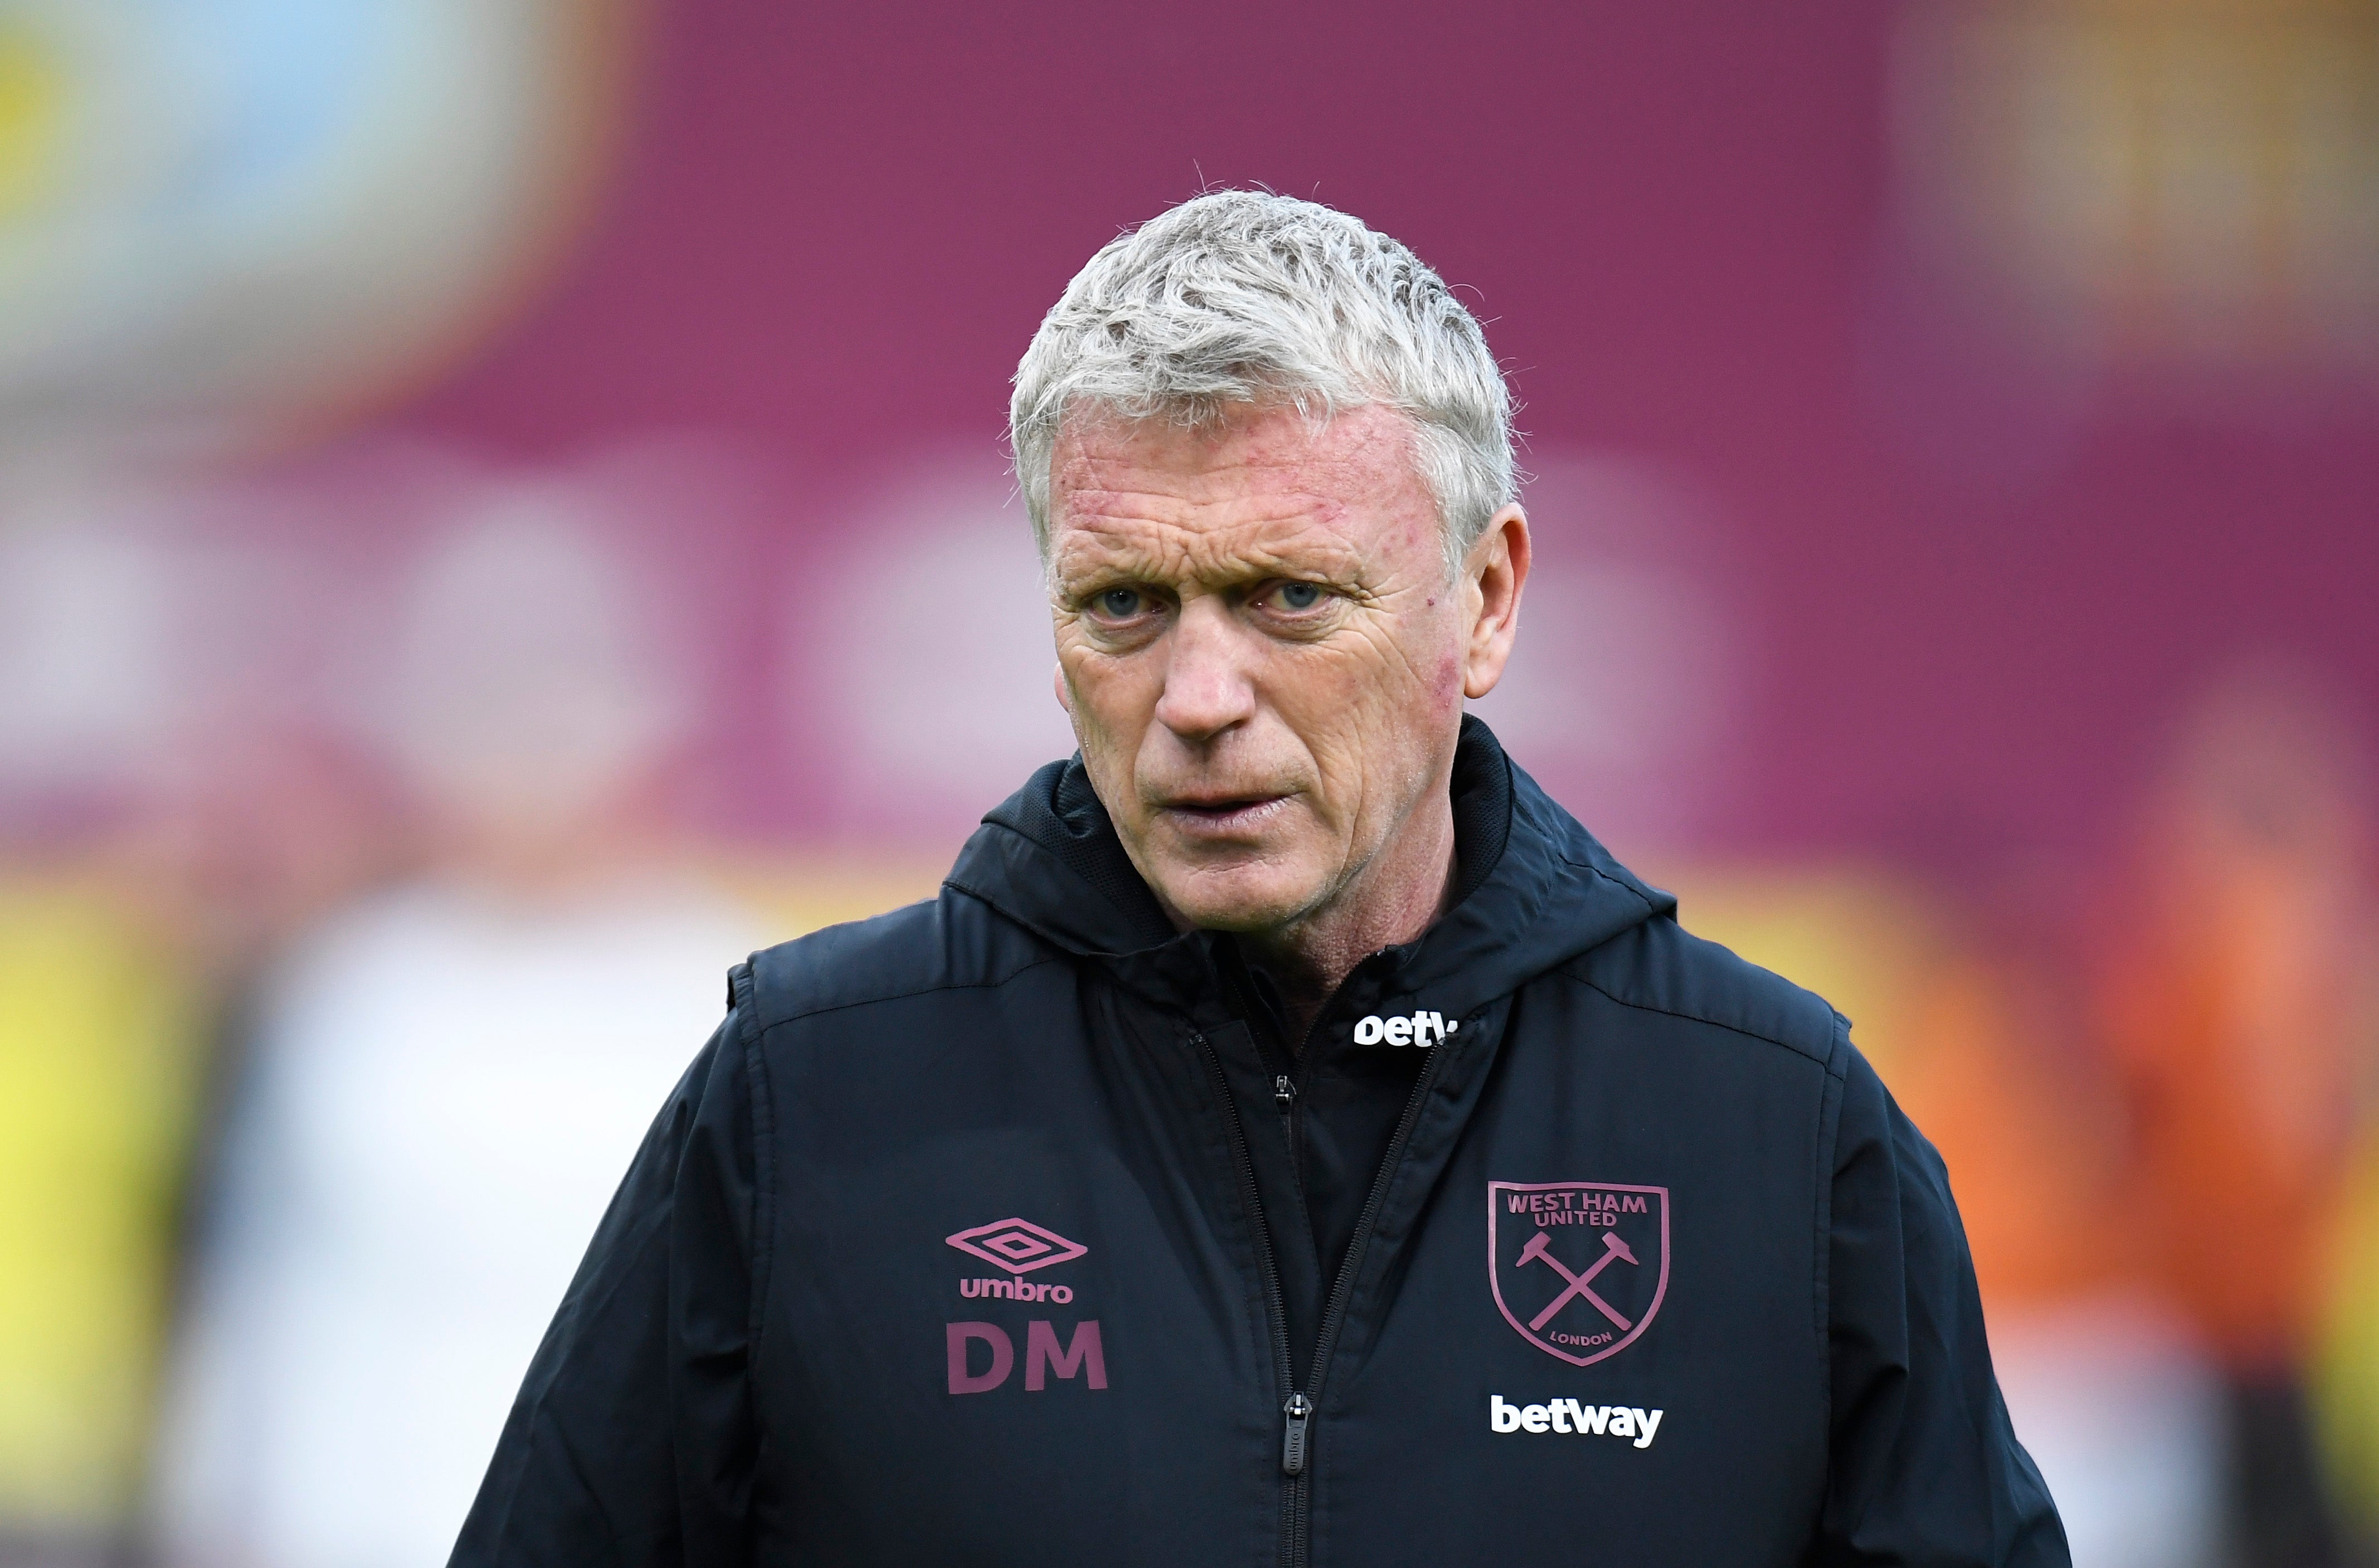 David Moyes’ current deal expires this summer